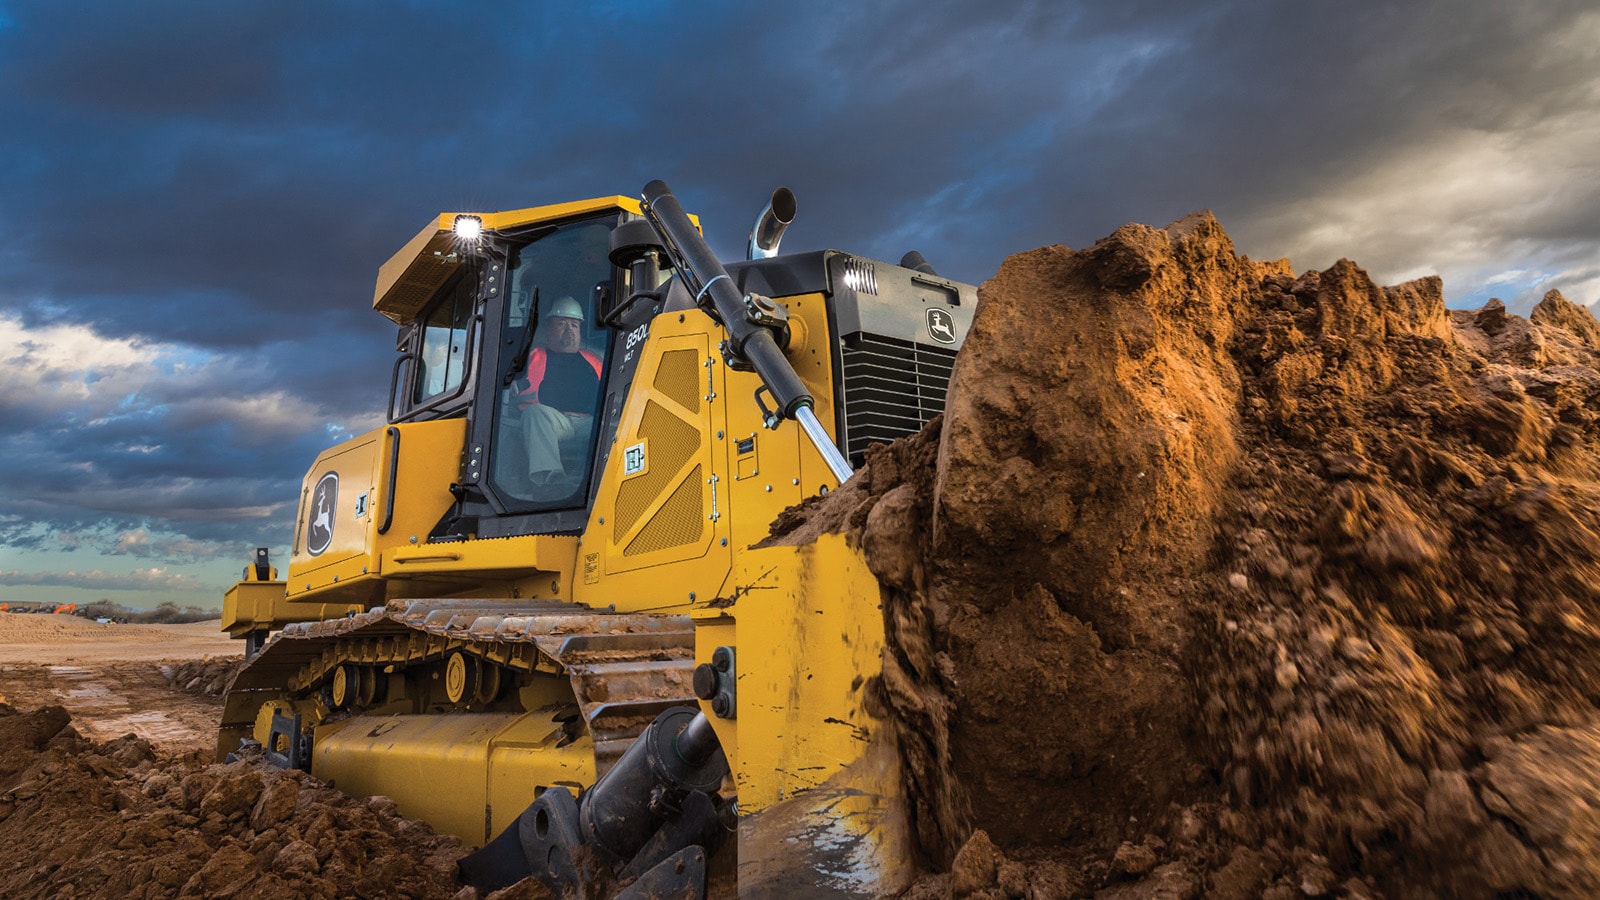 850L Dozer pushes a pile of dirt in front of a dramatic clouded sky